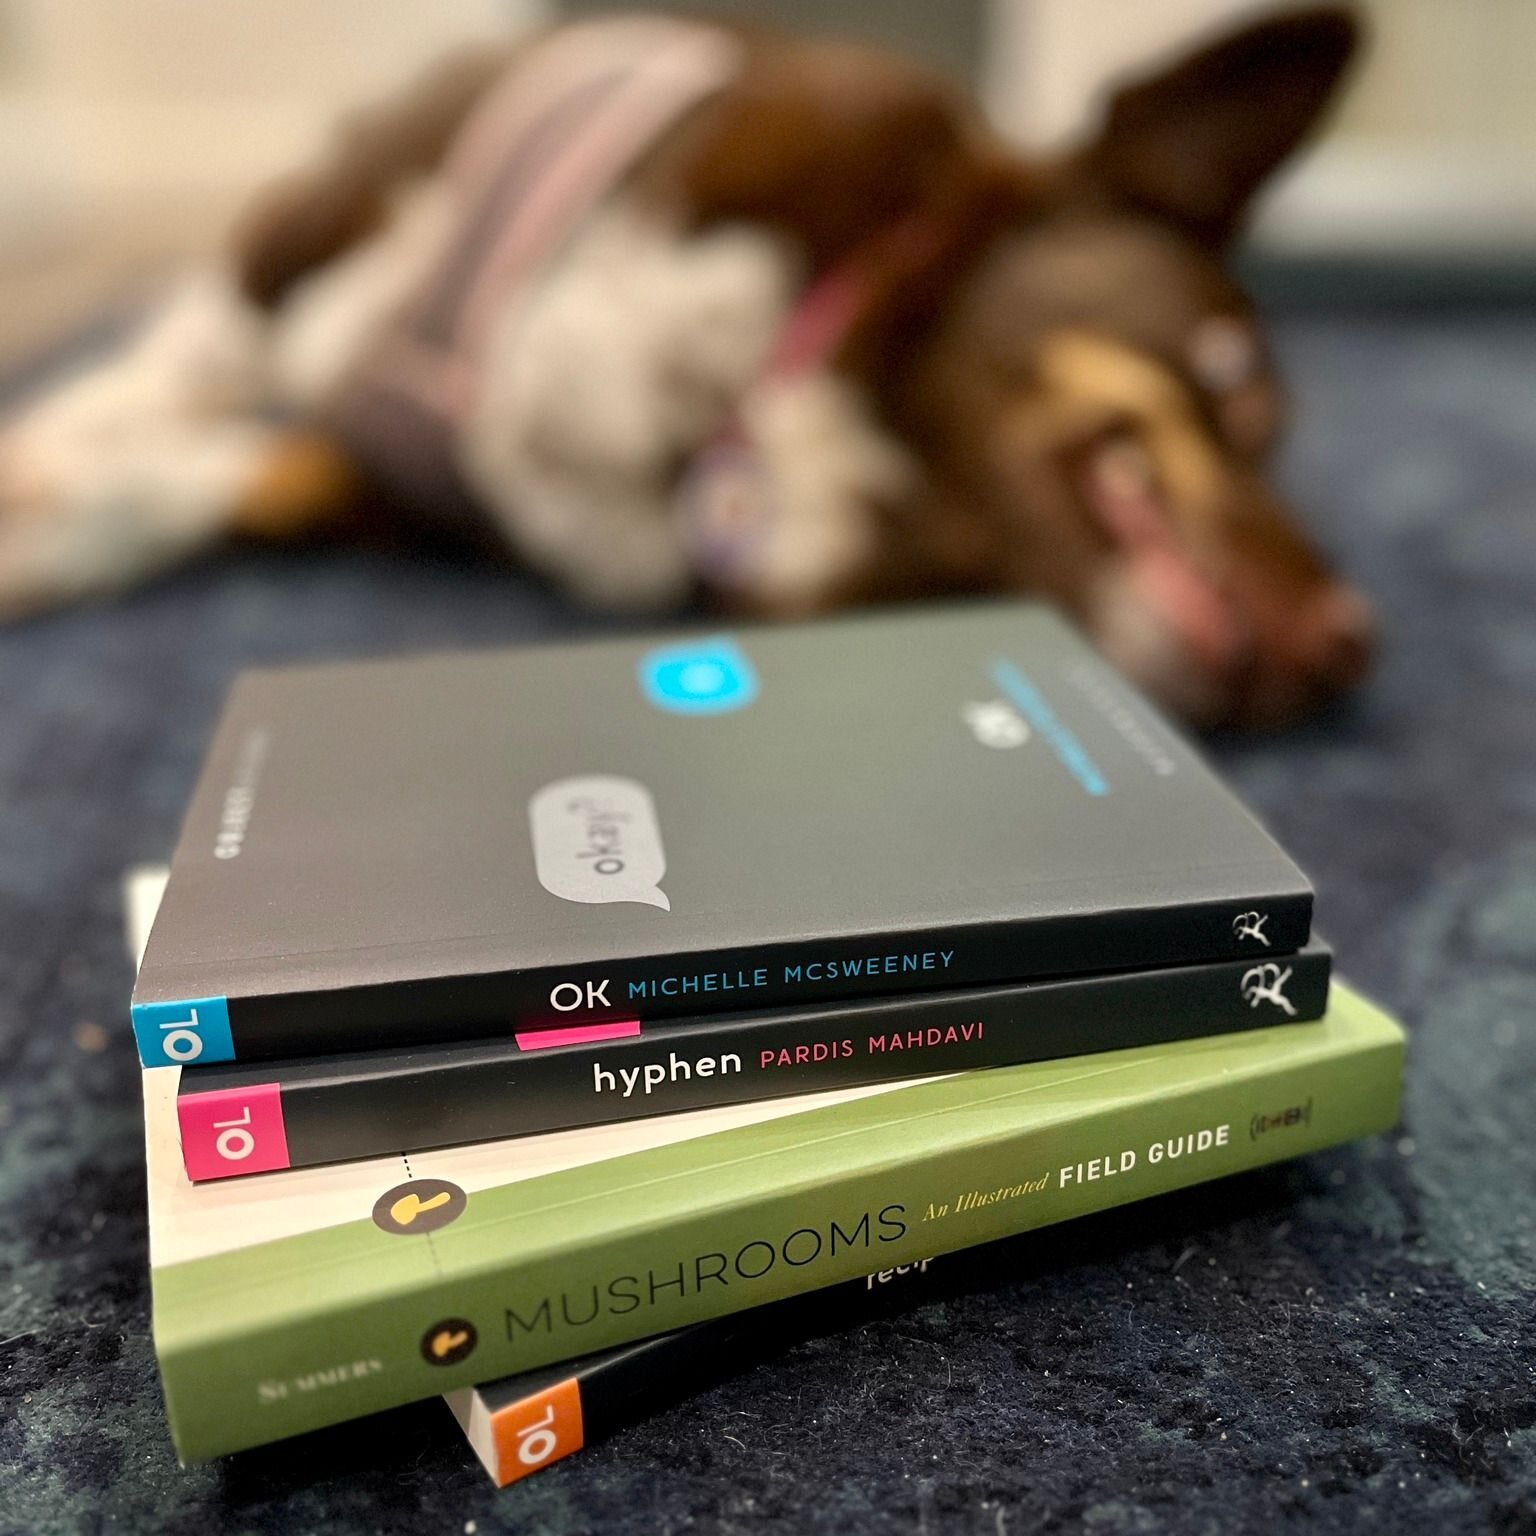 The best things come in small packages; just ask Hazel! 🐶
We've added to our collection of small pocket books, so you can always bring reading with you. 
(Corgi for scale.)

📖 Mushrooms: An Illustrated Field Guide
A beautifully illustrated pocket-s